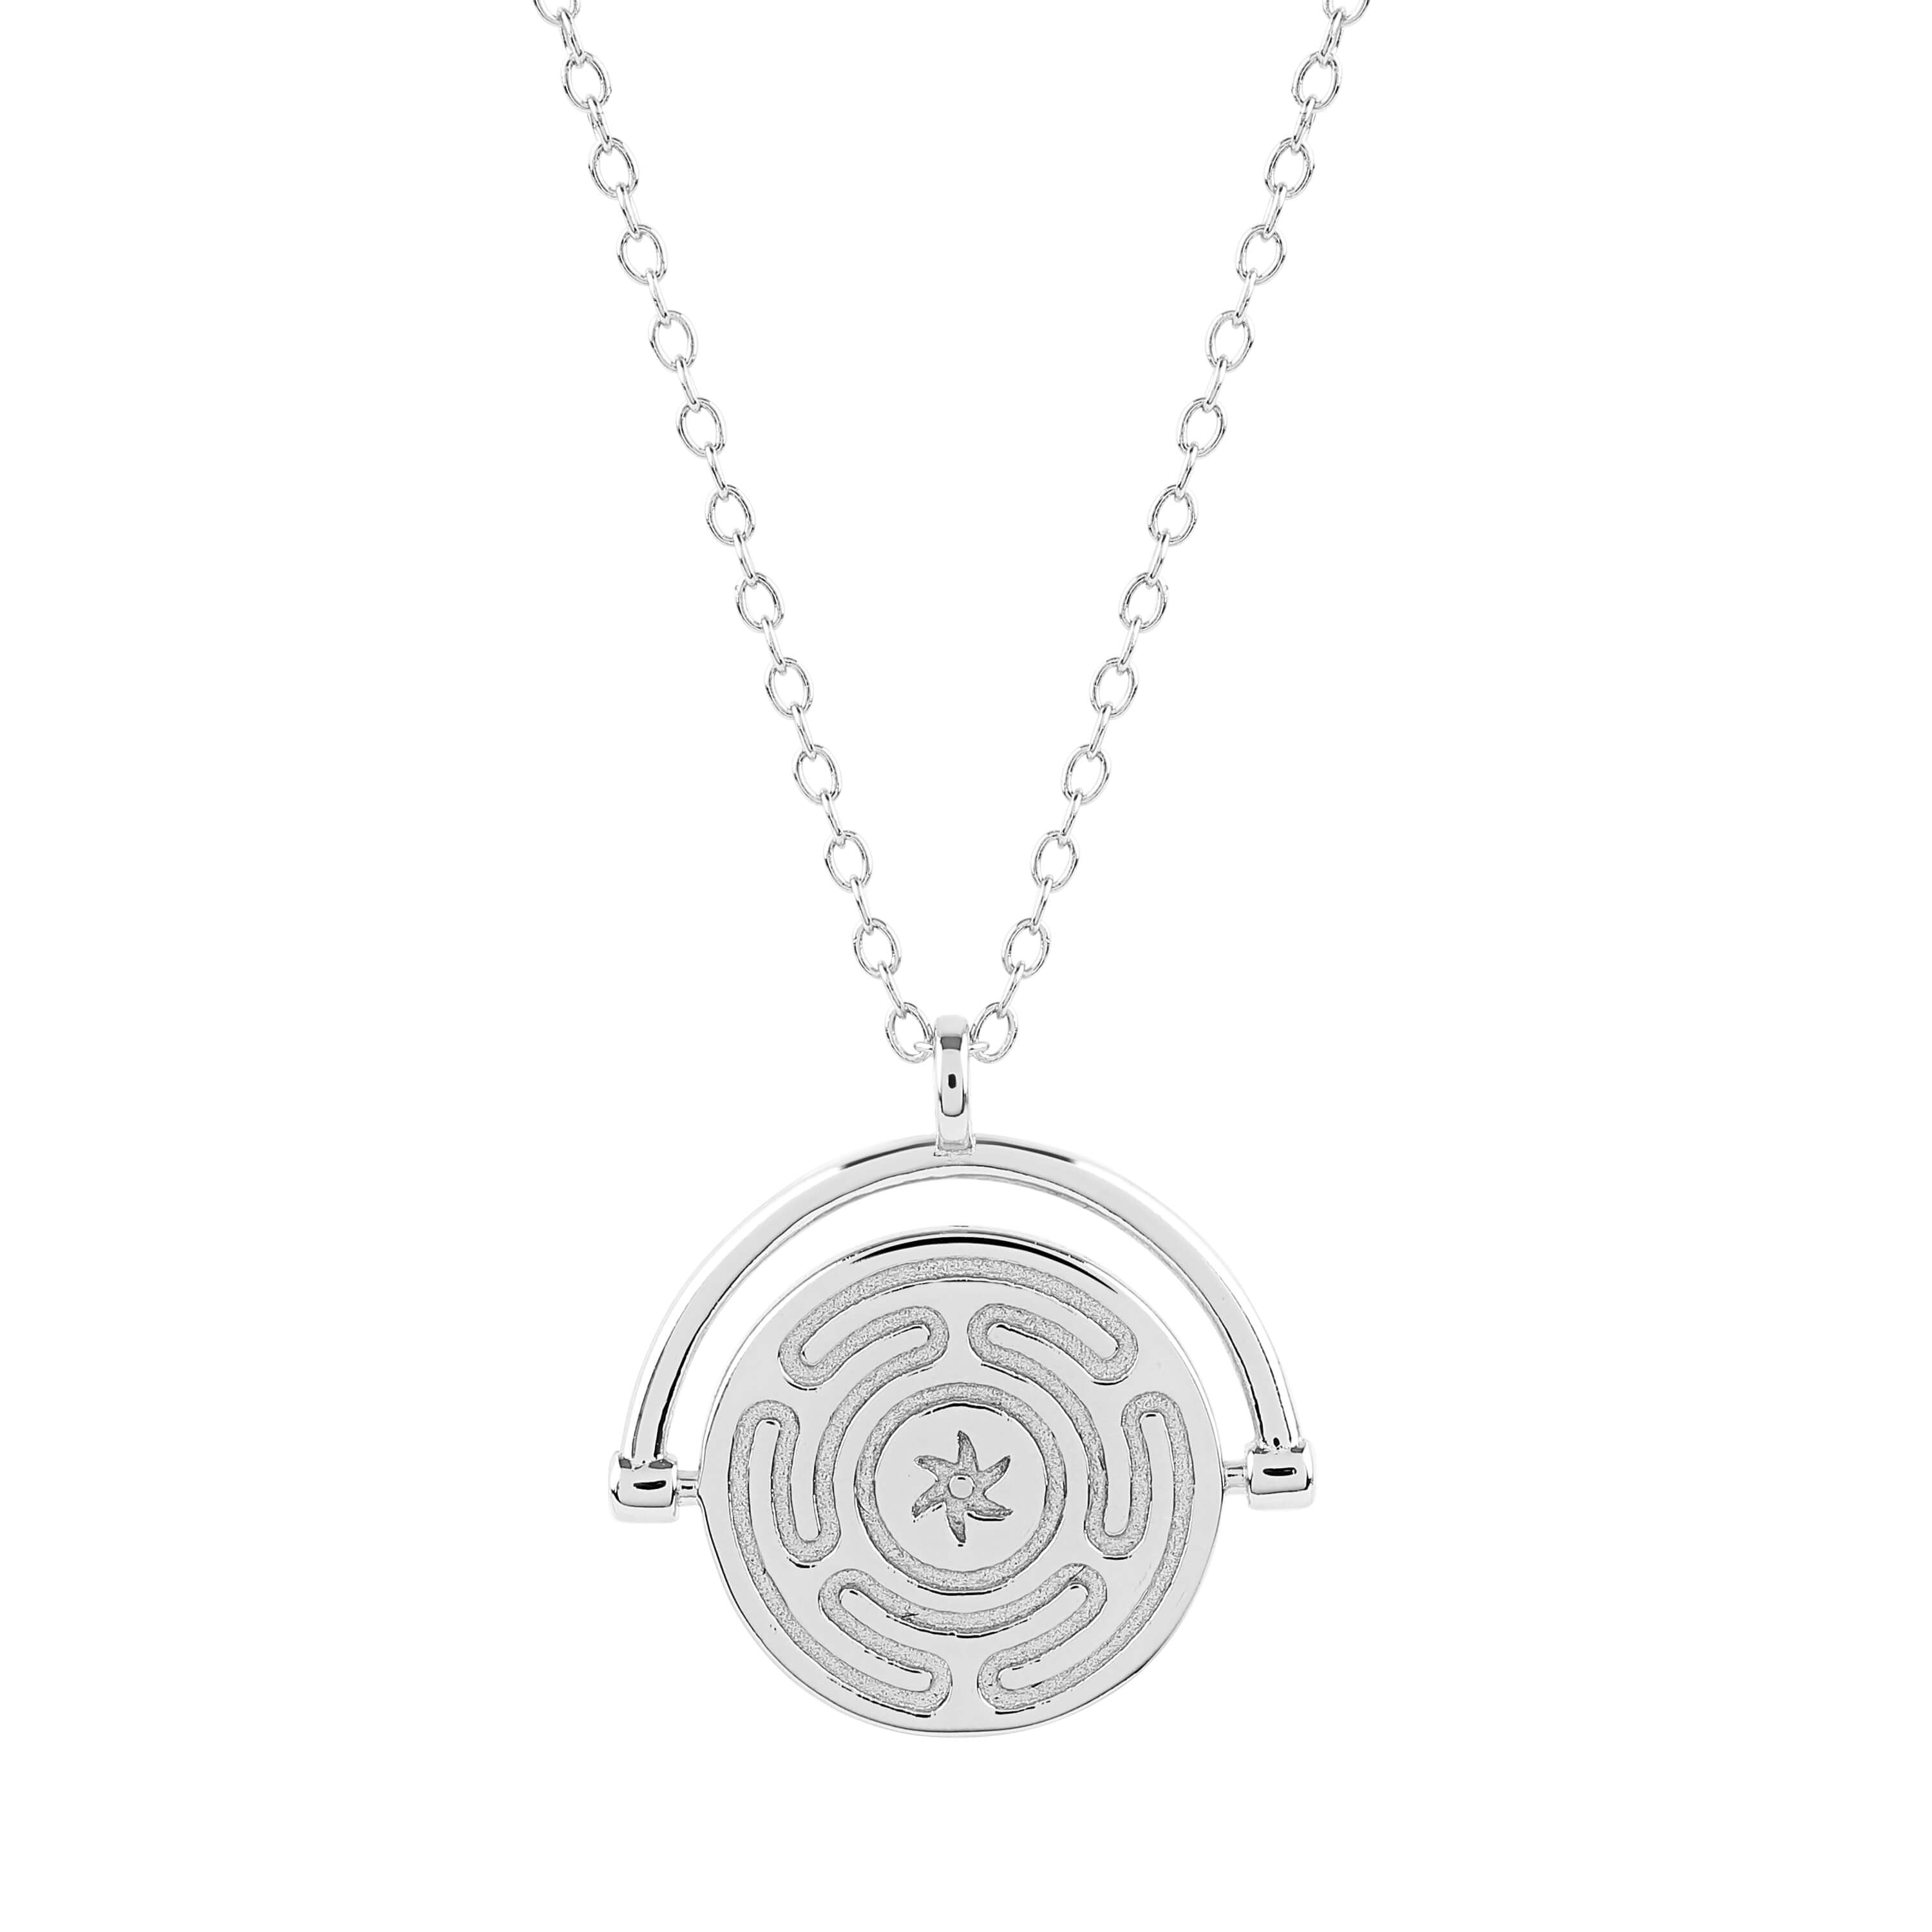 Hecate's Wheel  (Strophalos of Hecate) Necklace